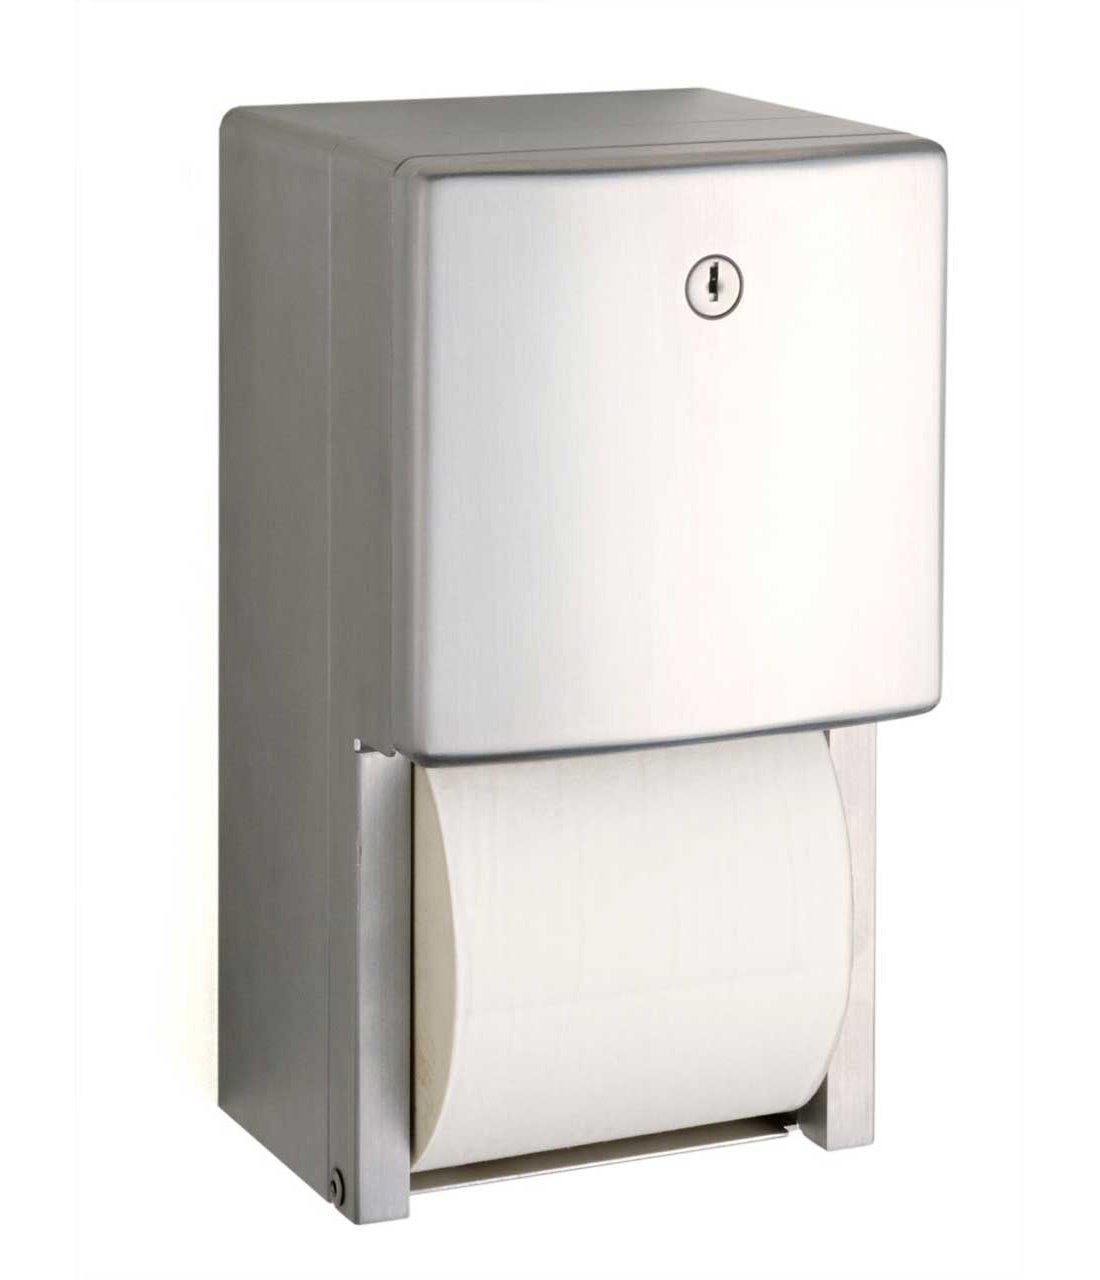 The Bobrick B-4288 is a surface-mounted toilet tissue dispenser in stainless steel.